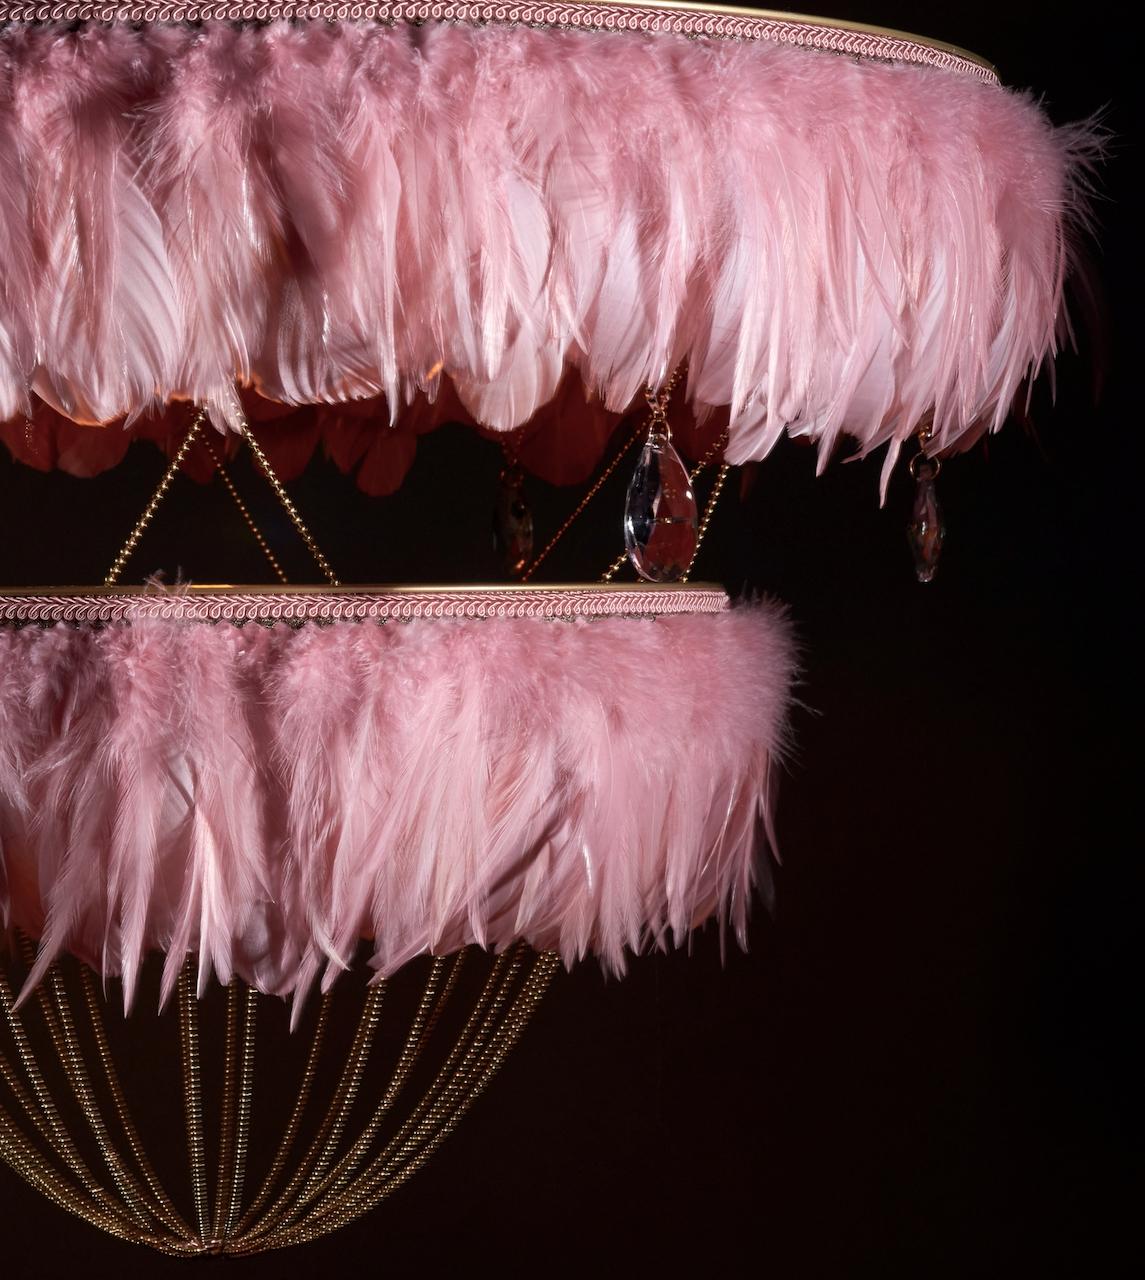 British Feather Chandelier in Flamingo Pink  - Bertie -  Hand Made to order in London.  For Sale